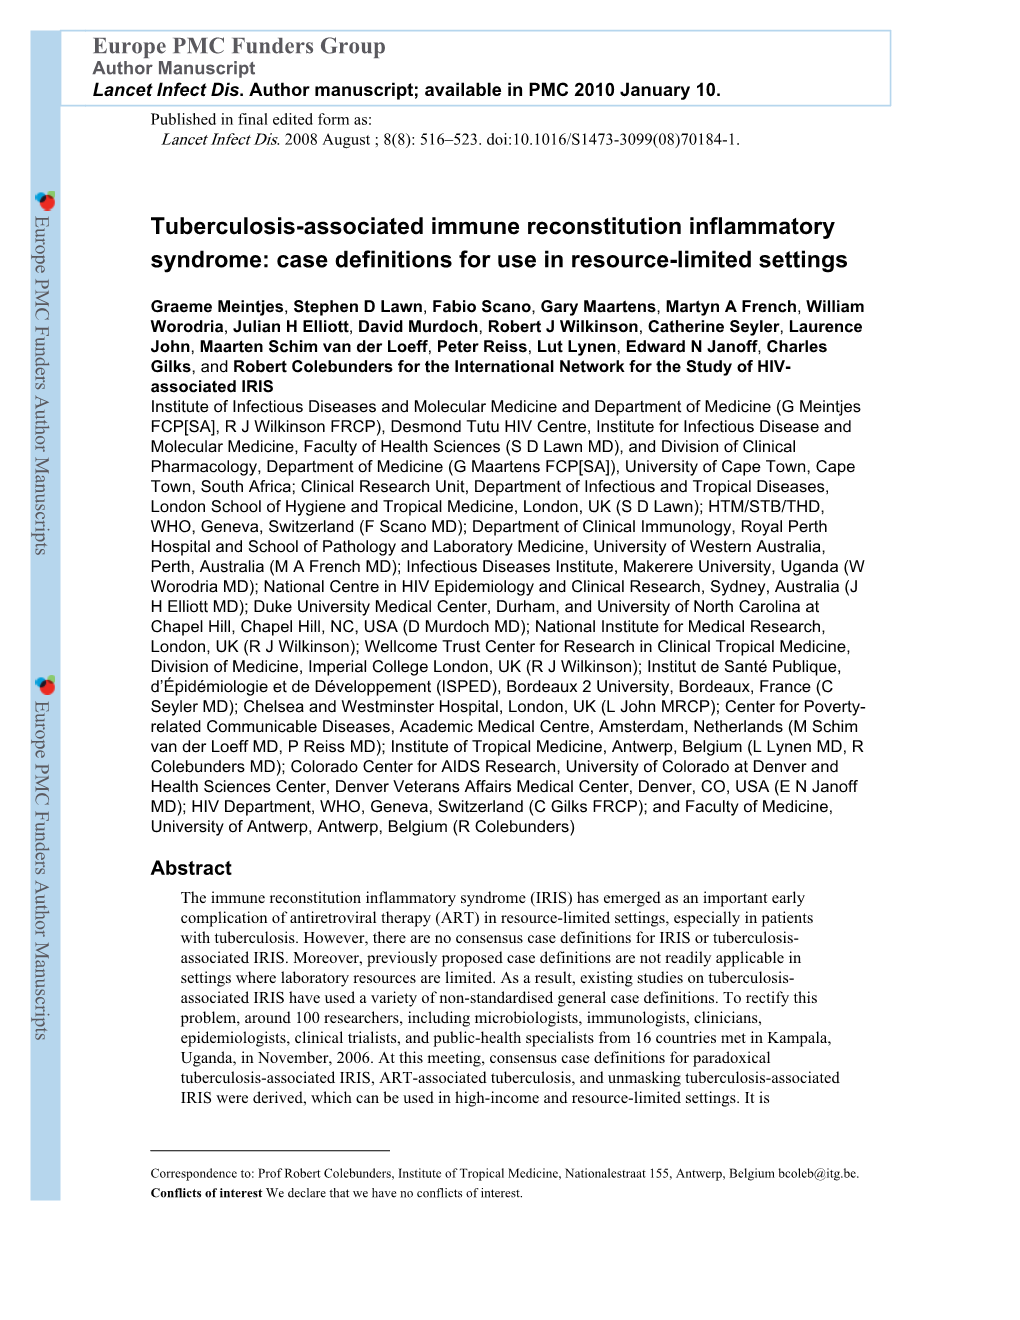 Tuberculosis-Associated Immune Reconstitution Inflammatory Syndrome: Case Definitions for Use in Resource-Limited Settings